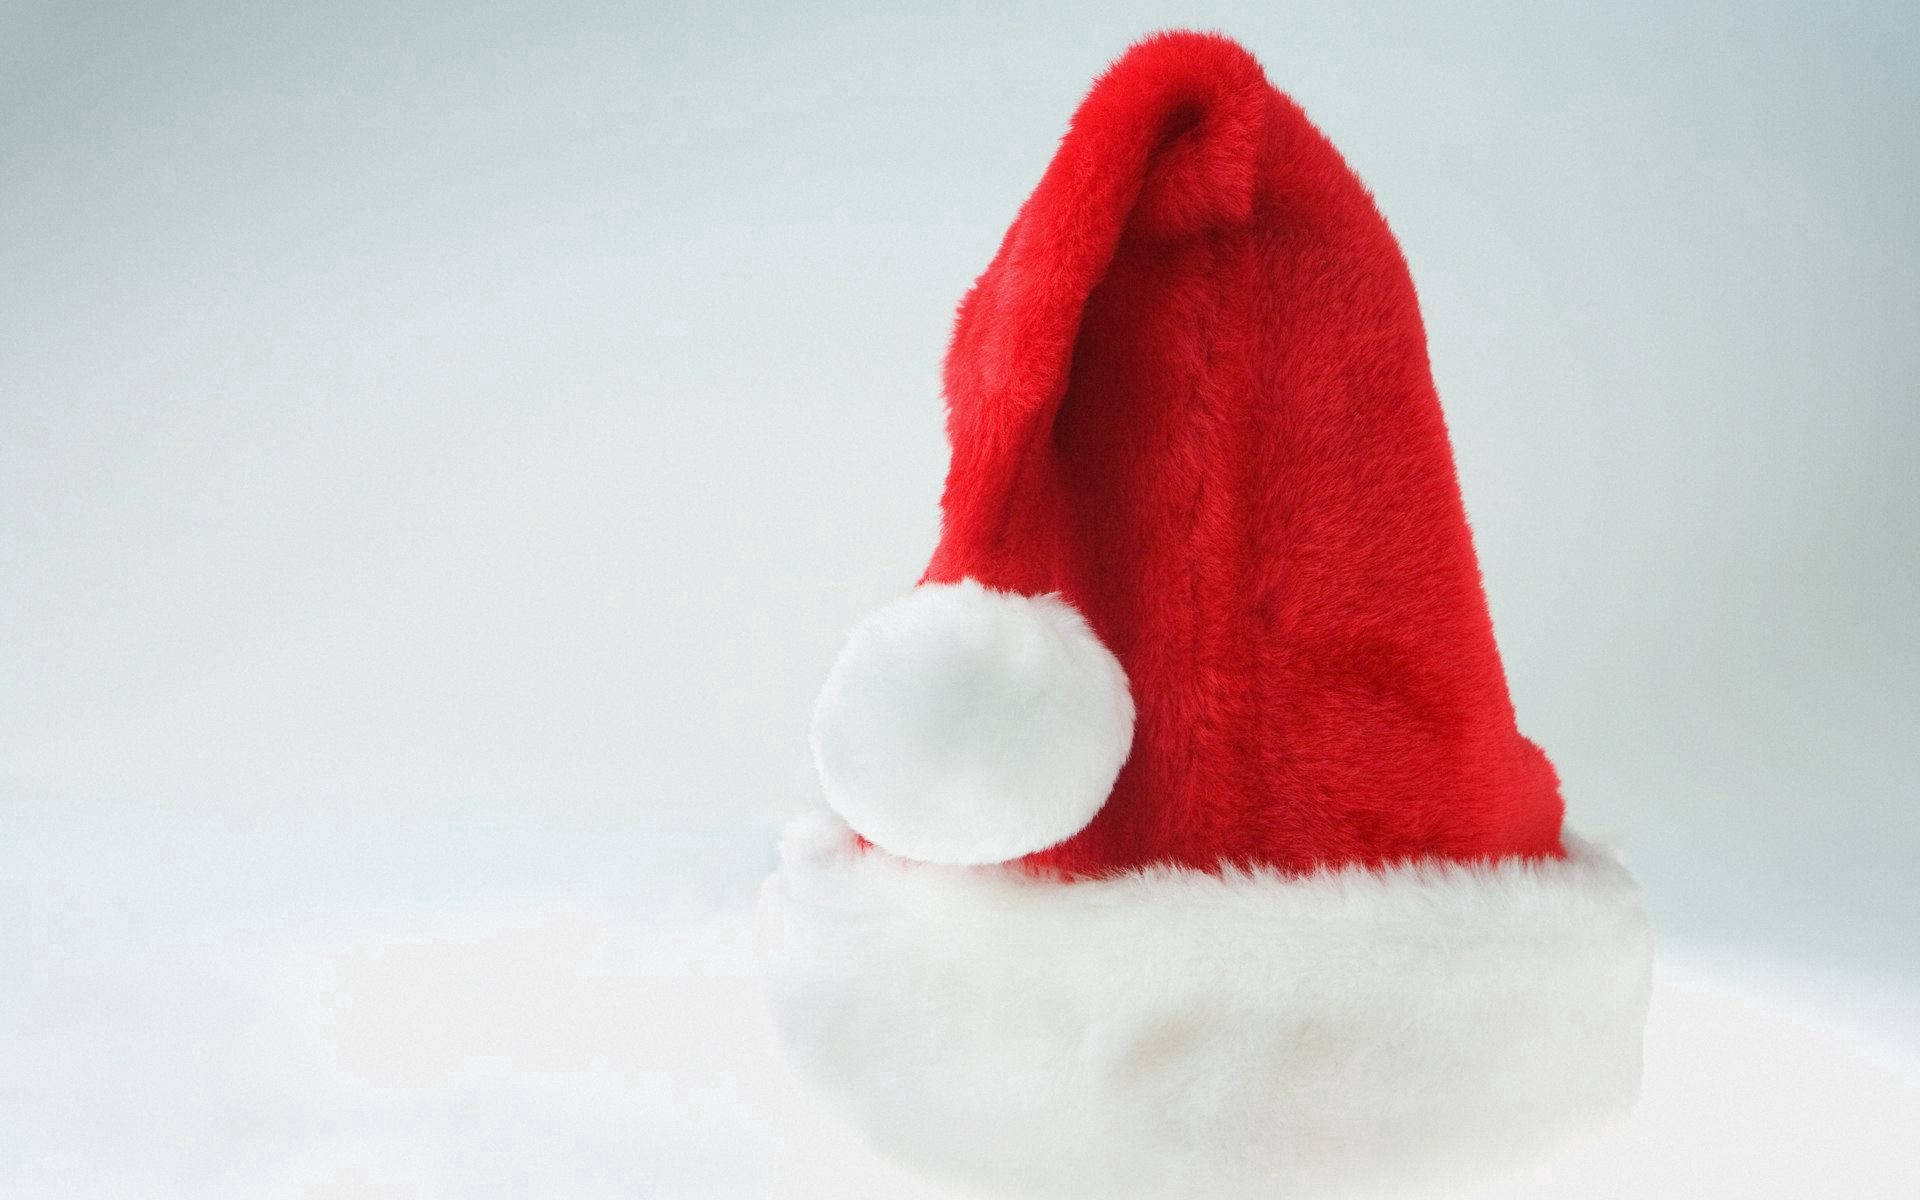 New Year's Red Santa Claus Hat Background